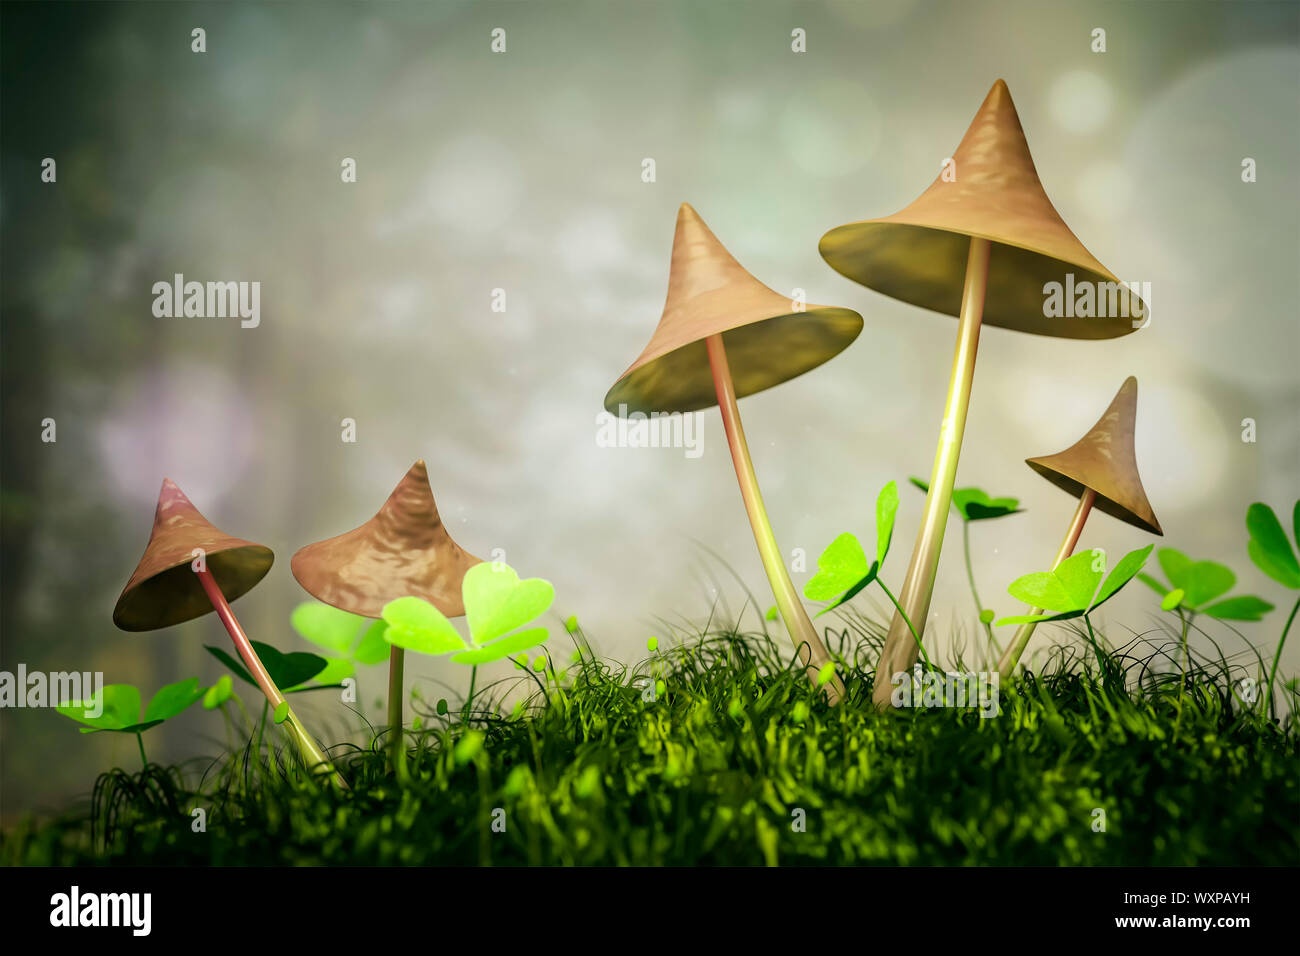 An image of some nice mushrooms in the forest Stock Photo